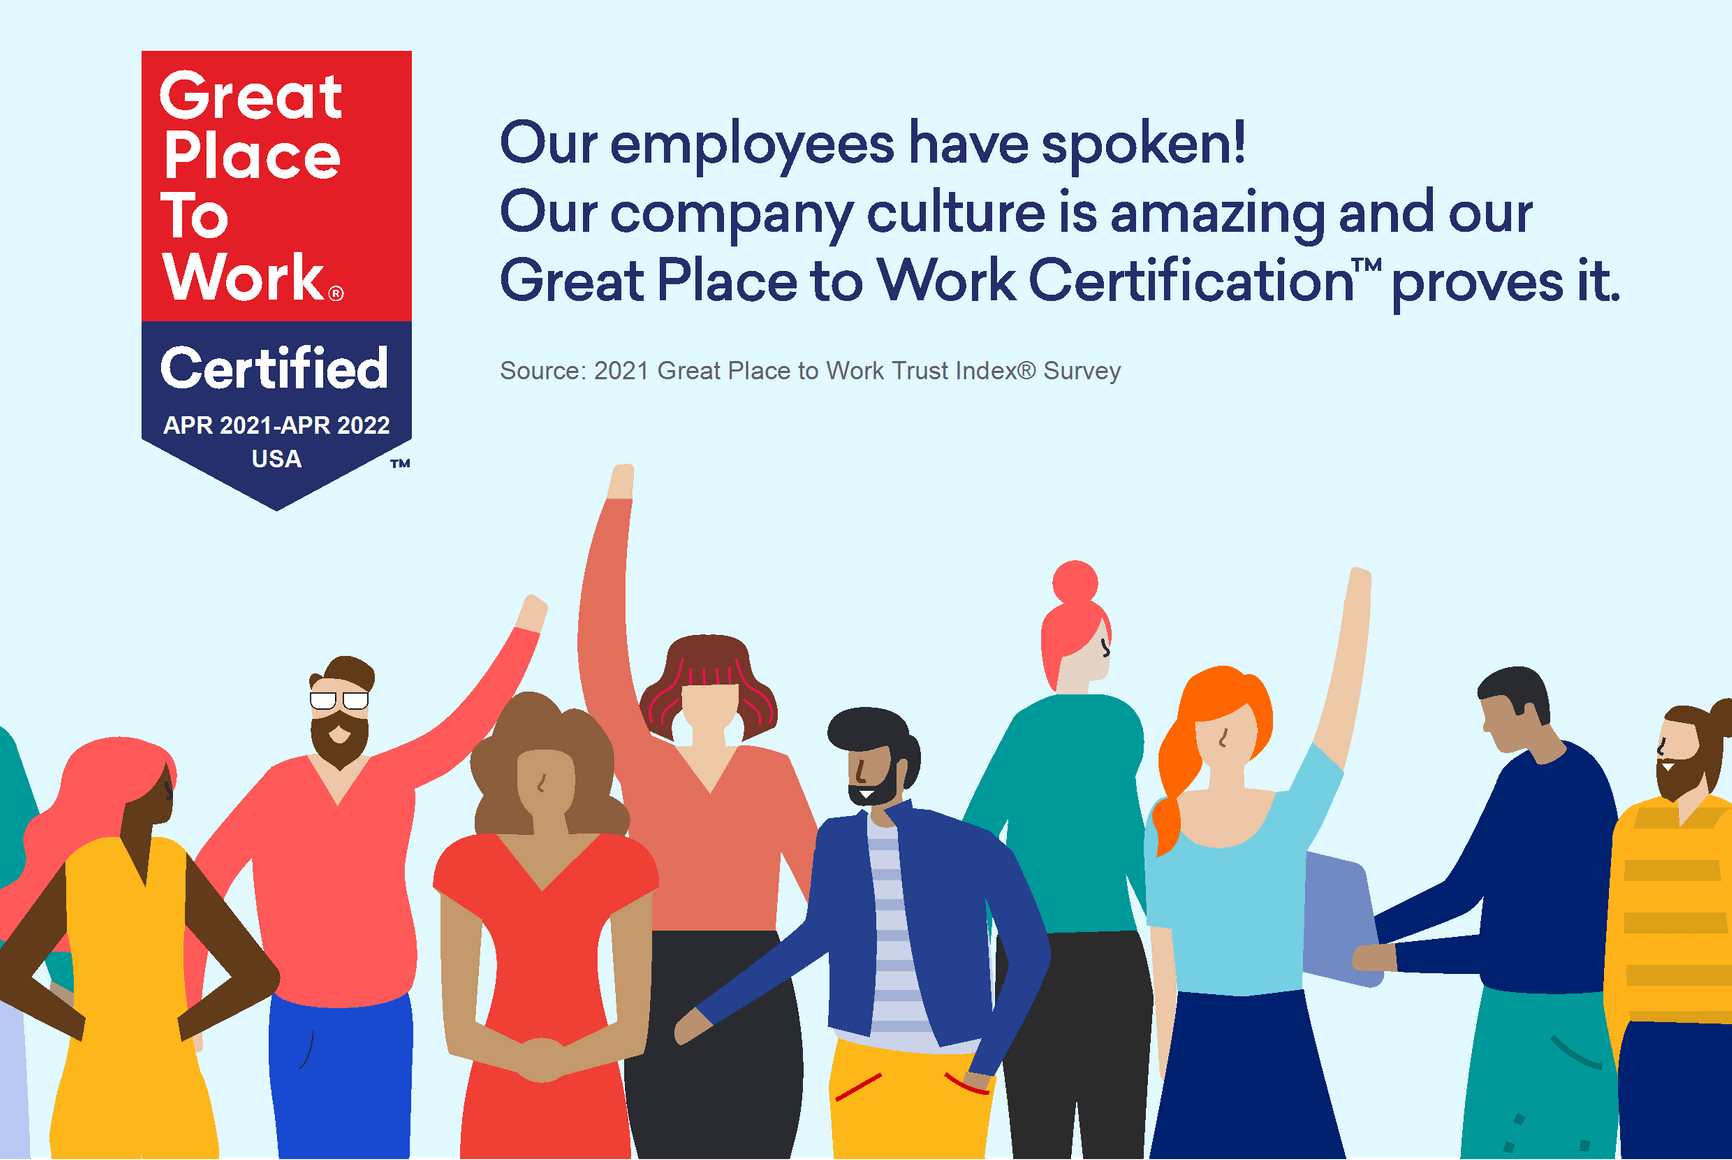 Stat showing how many employees think Lever is a great place to work - 94%